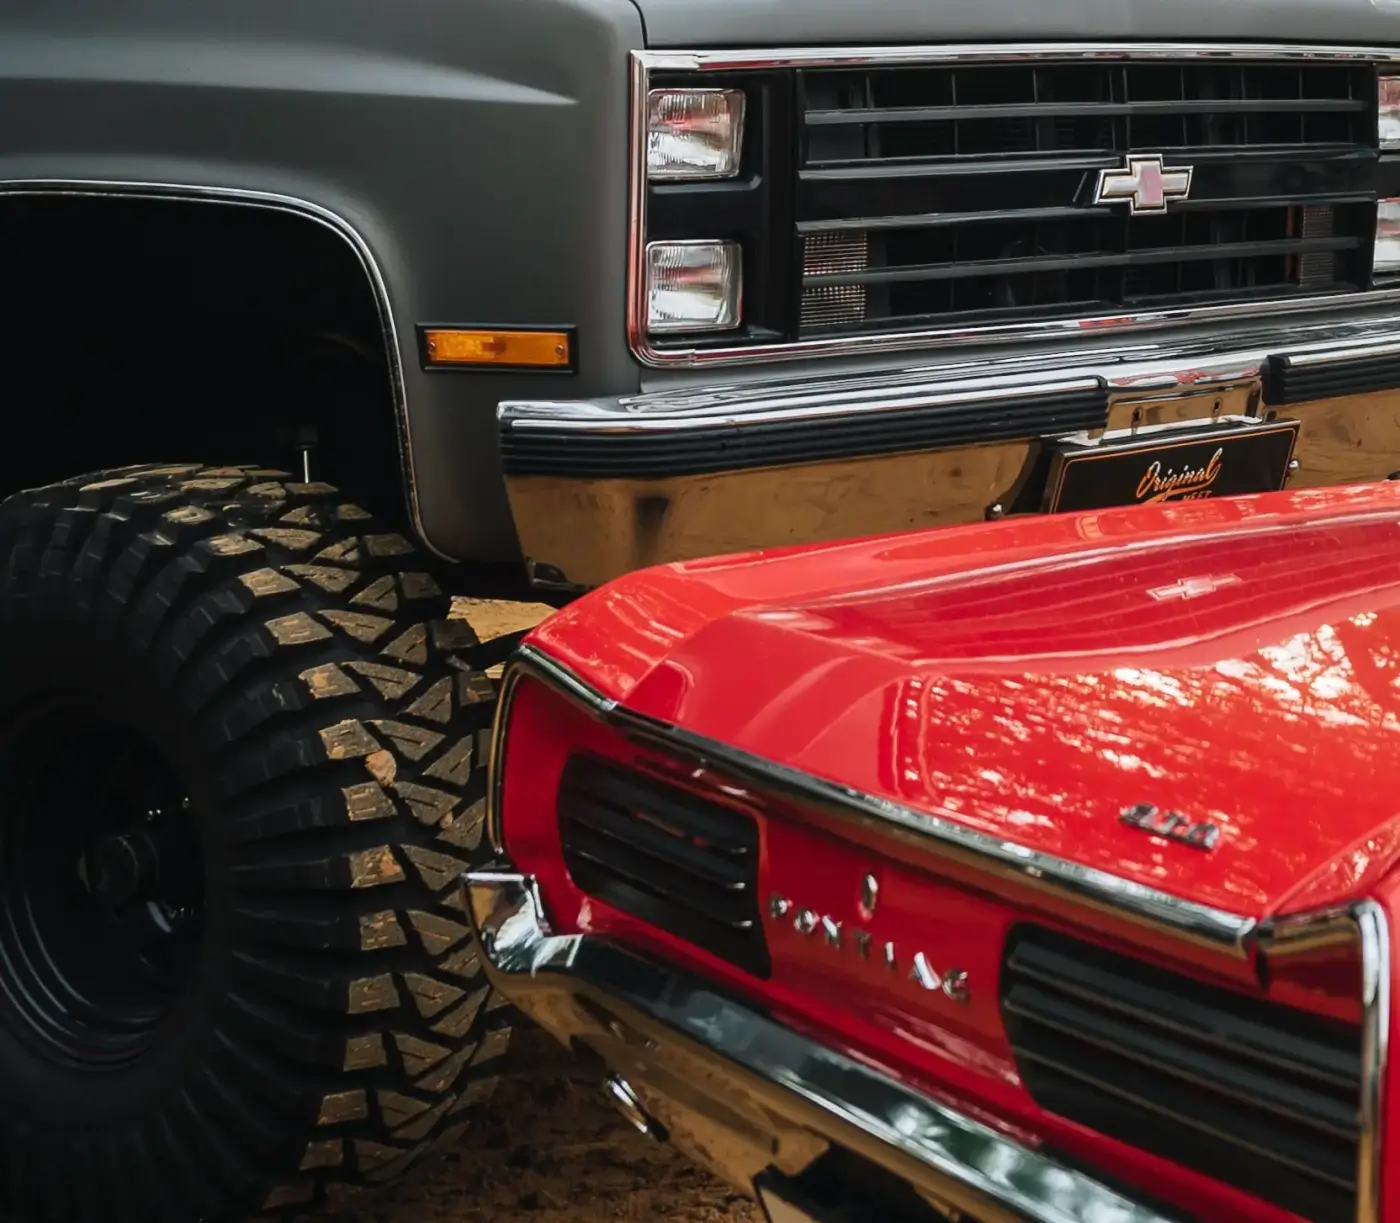 Find a Father’s Day truck show!